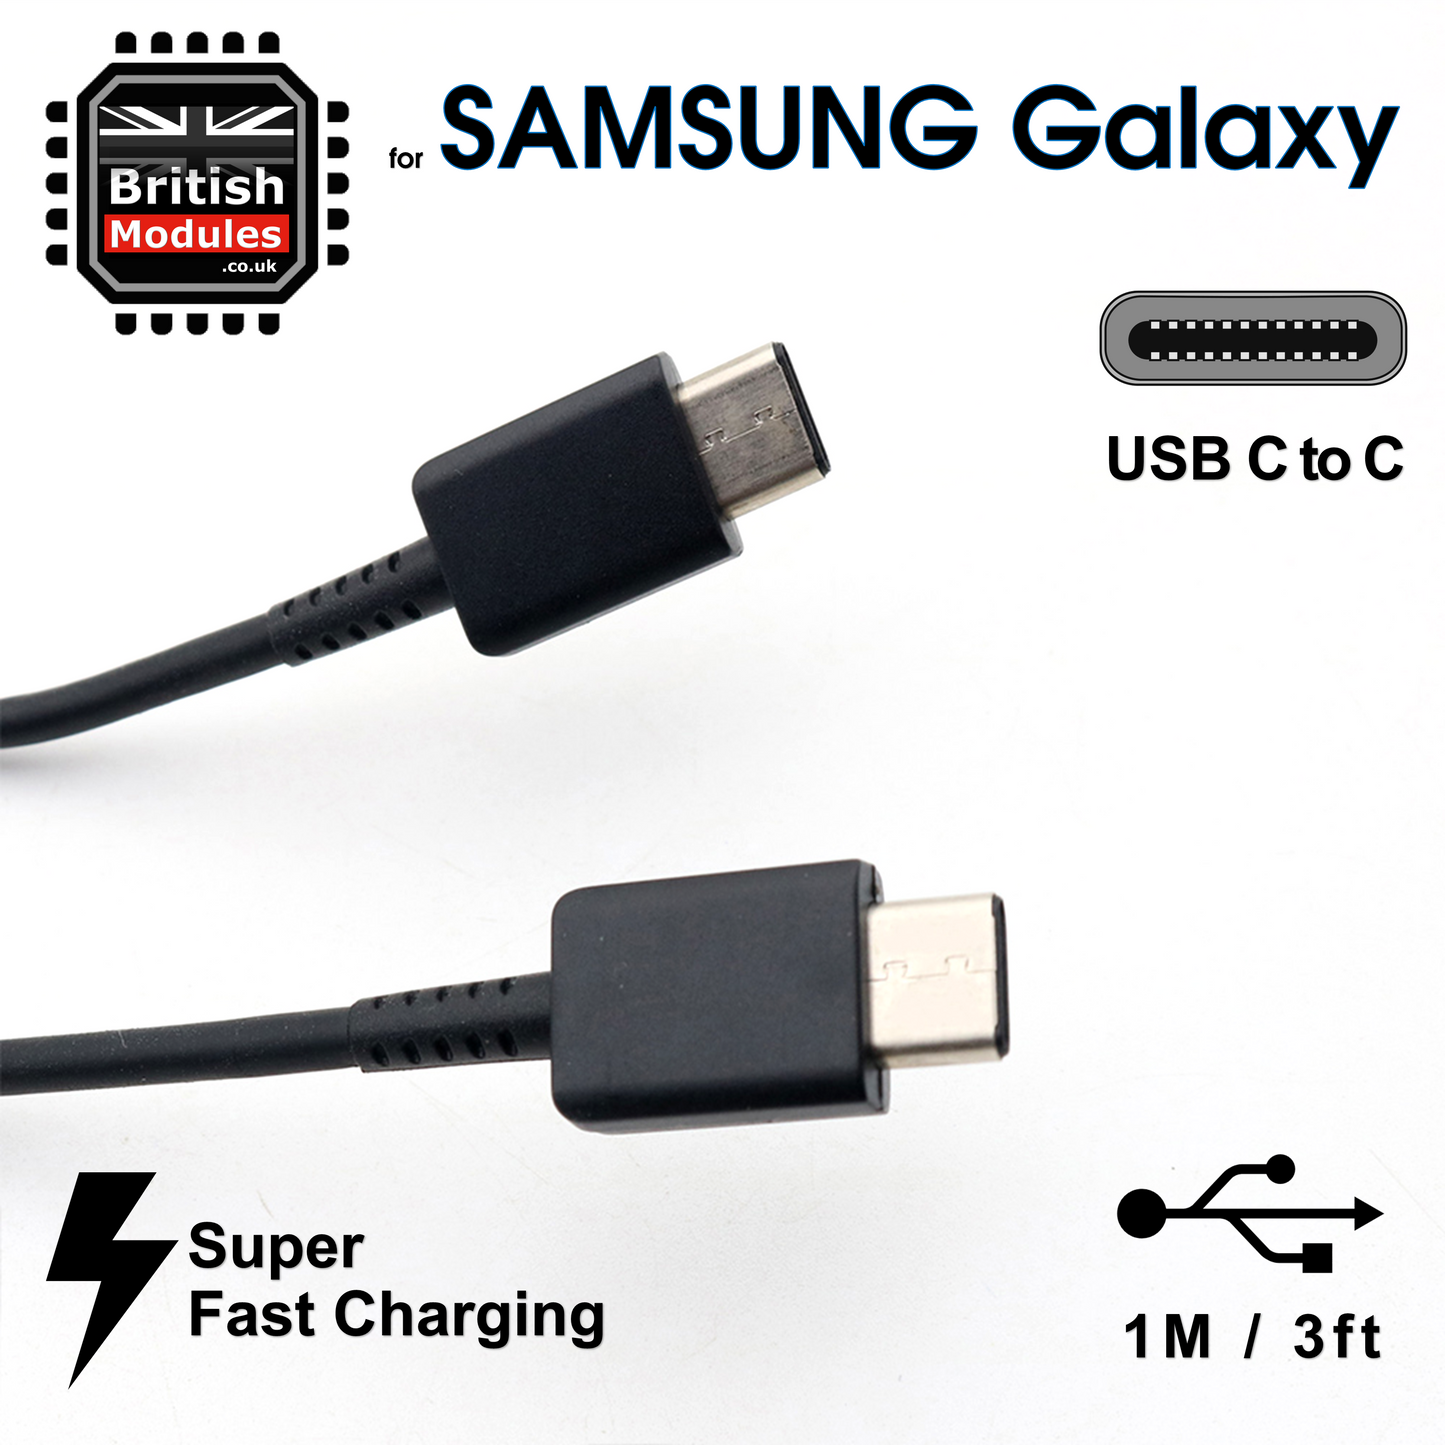 Official Samsung Galaxy 25W Super Fast Mains Charger With Cable Black EP-TA800 PD